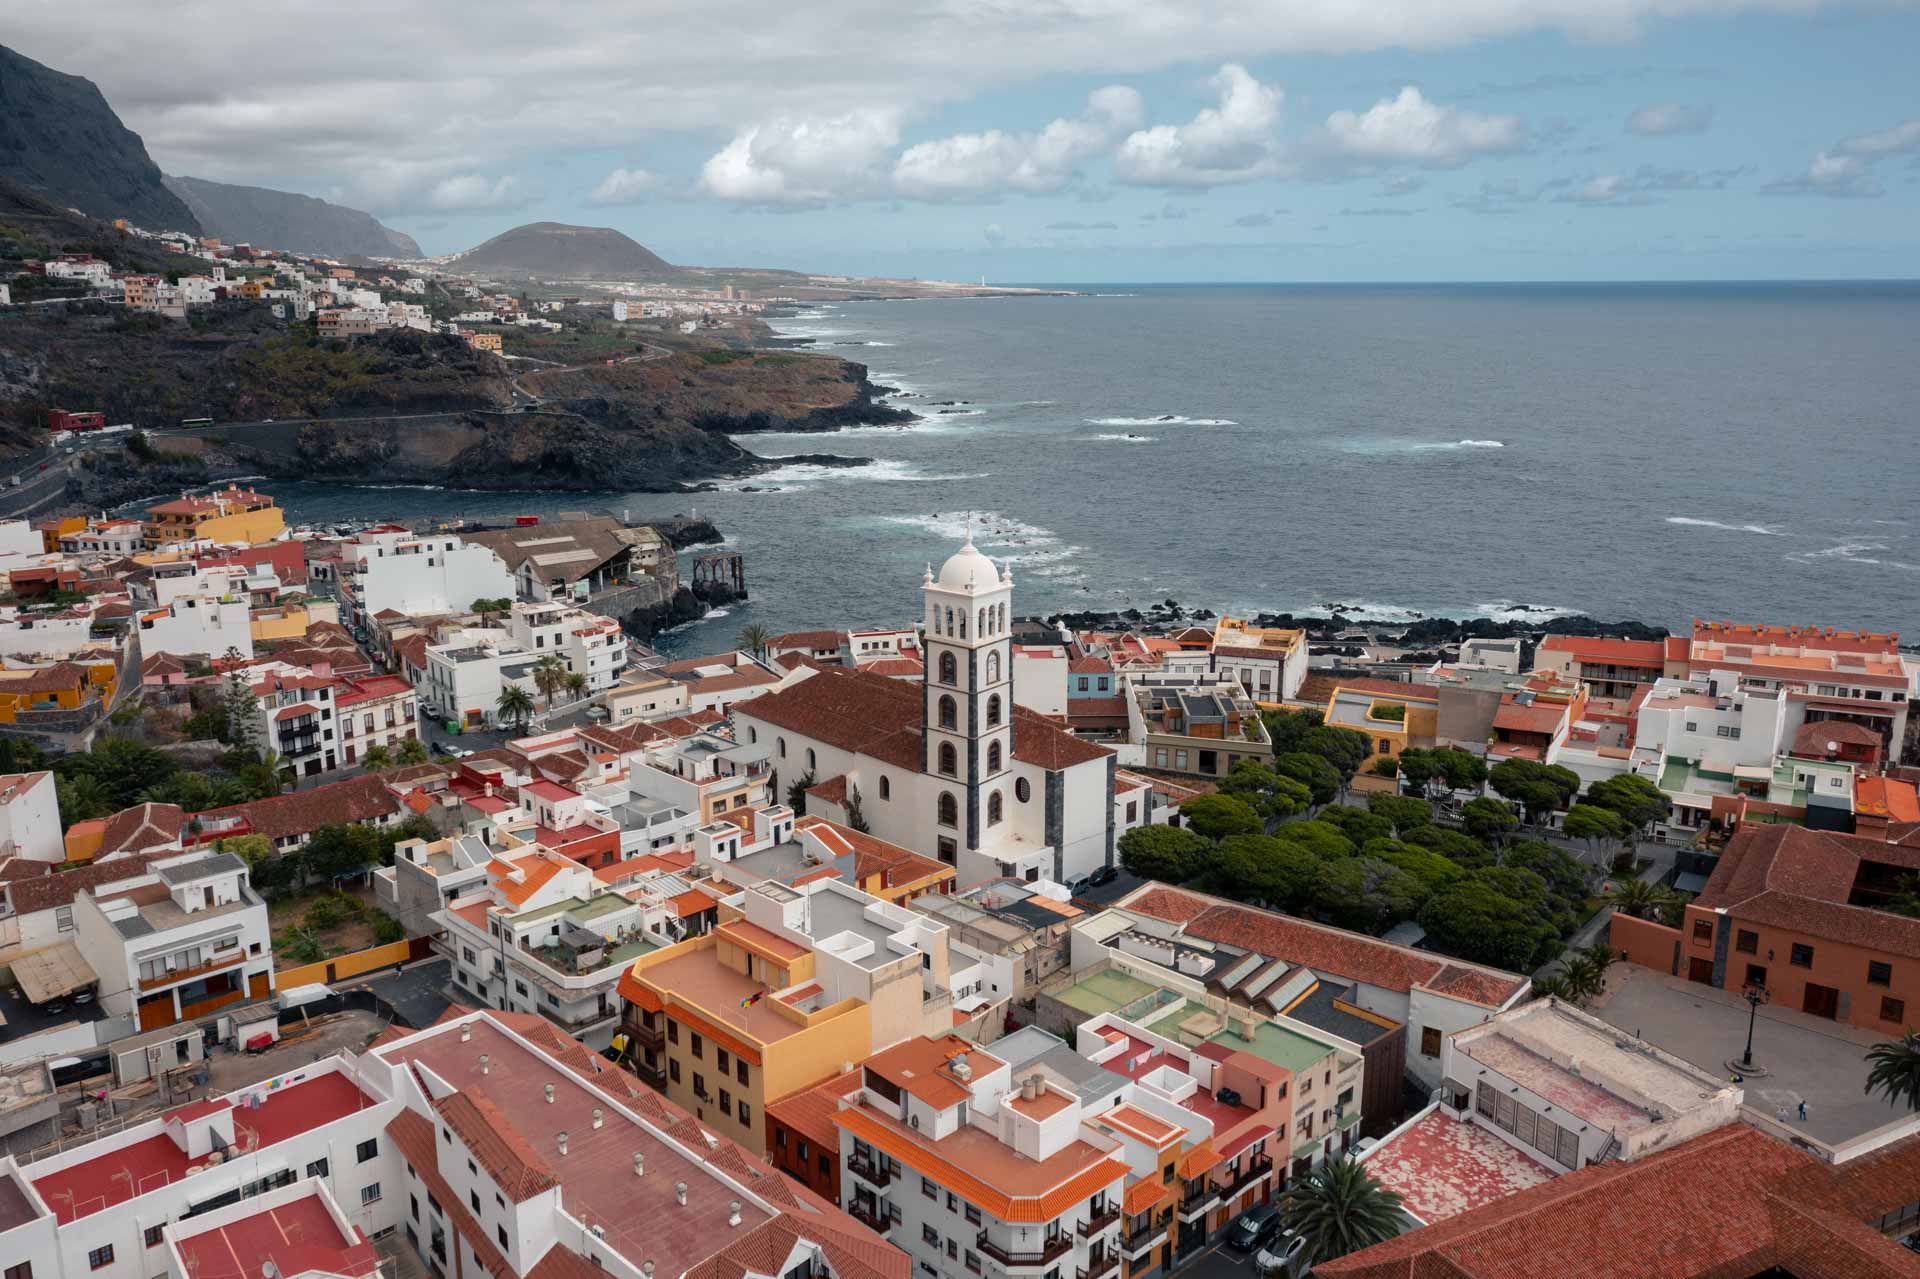 things to do in tenerife, tenerife attractions, places to visit in tenerife, what to do in tenerife, adult only hotels in tenerife